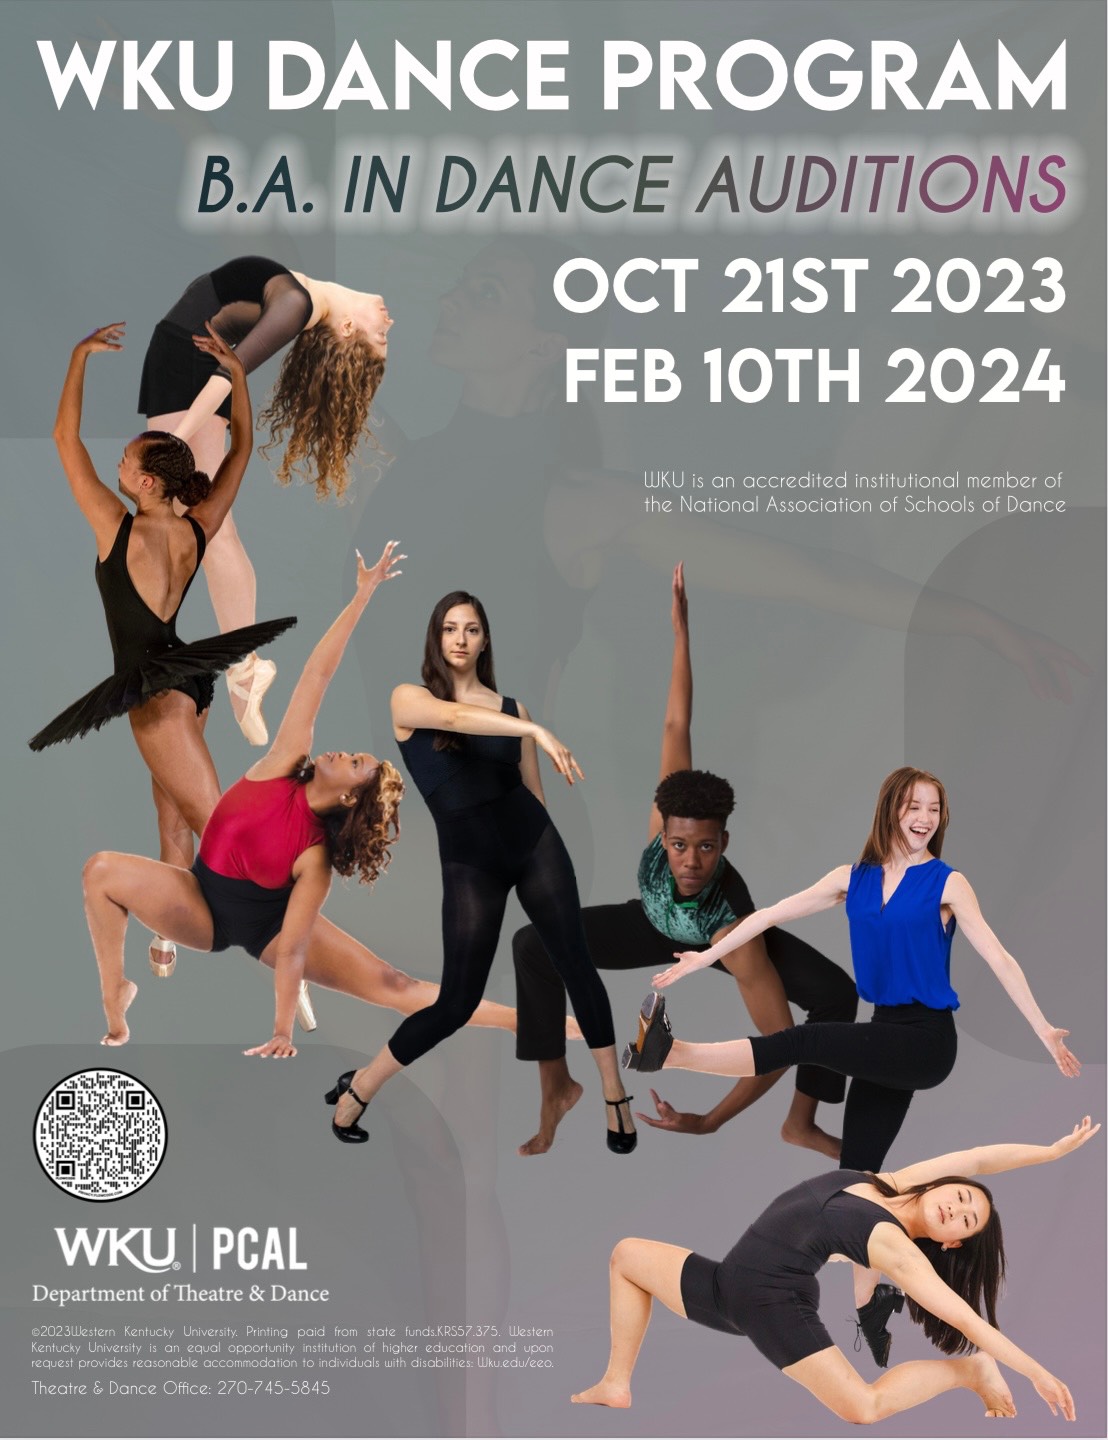 Poster depicting dancers performing all four genres of dance along with the same details regarding dates and location for the auditions also listed below.